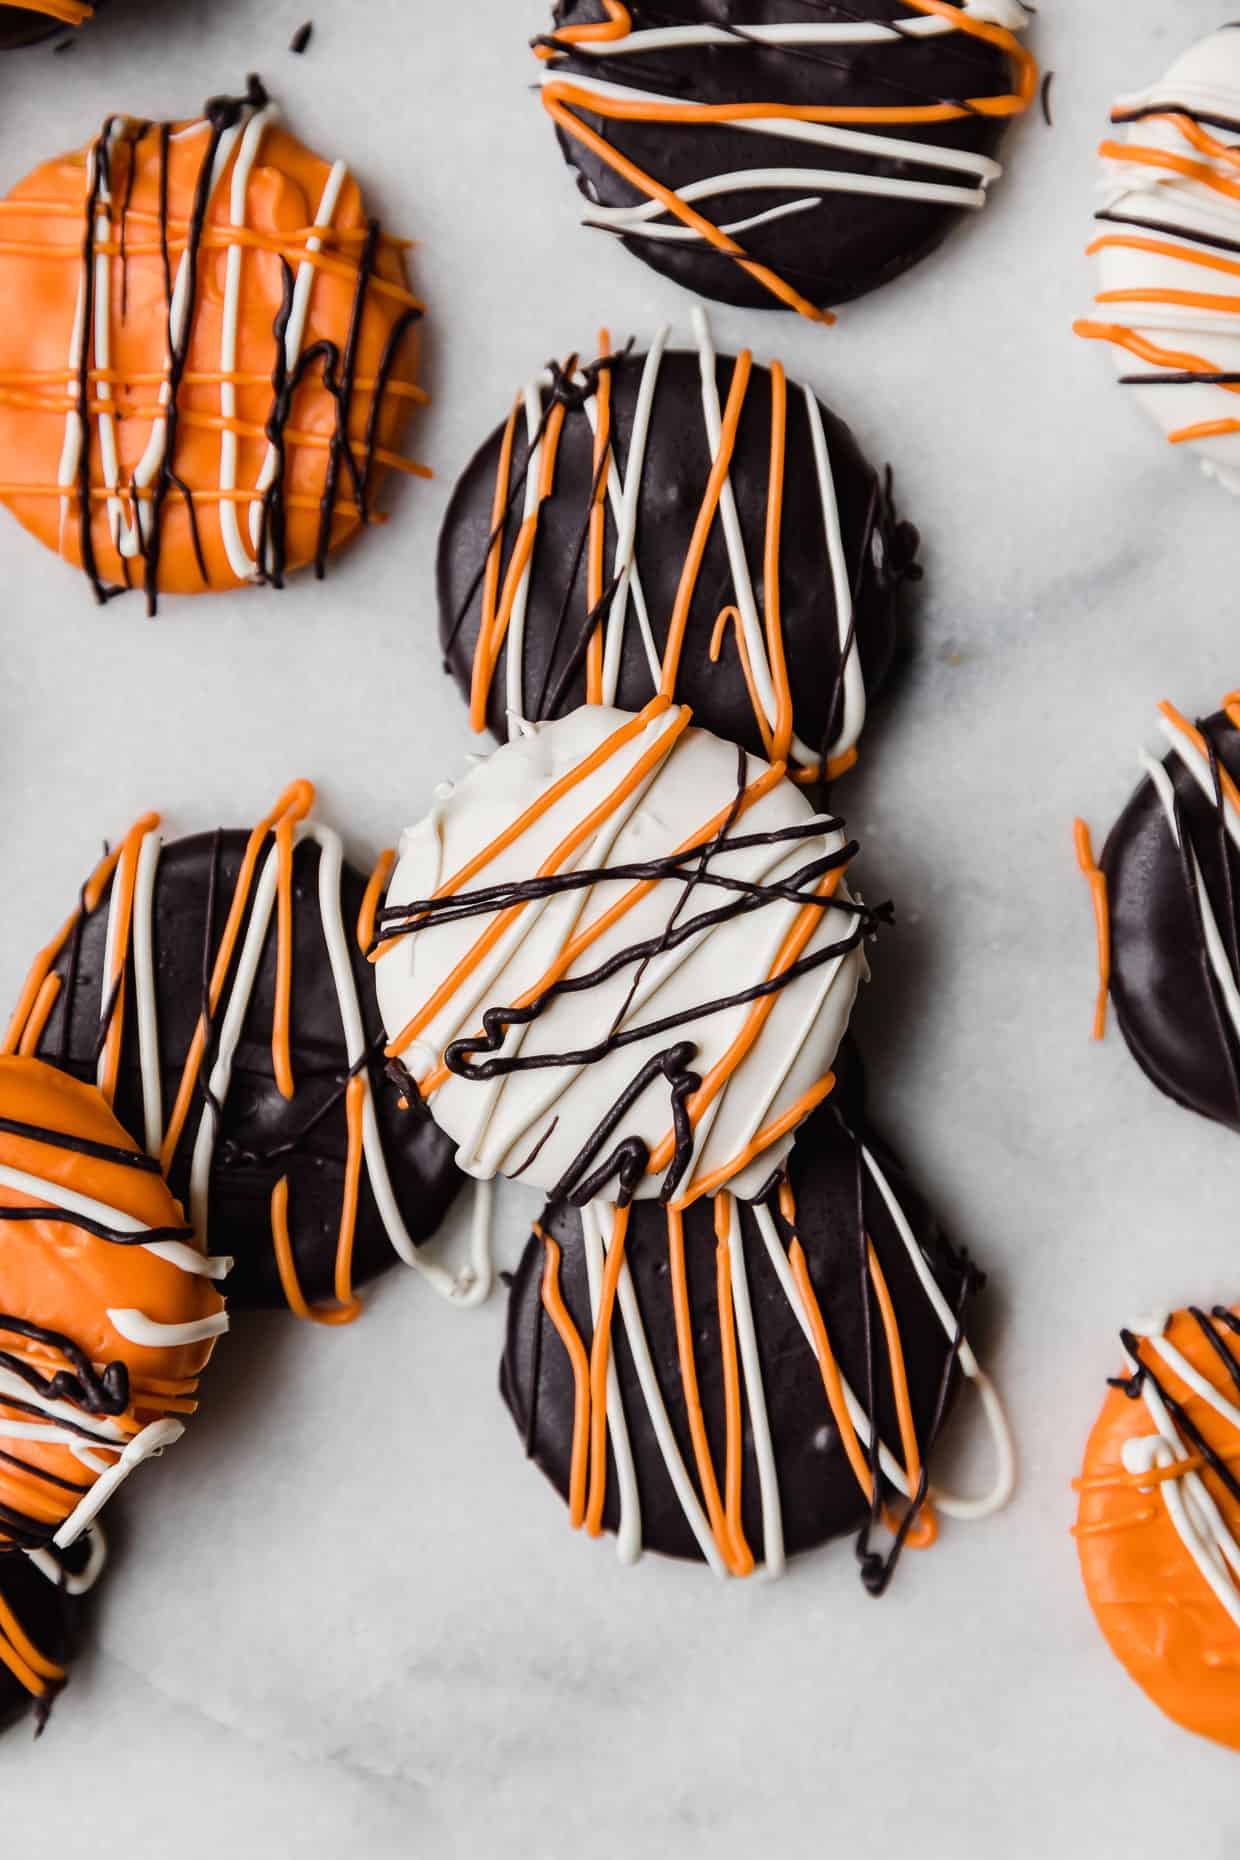 Ritz crackers covered in black, orange, and white chocolate.